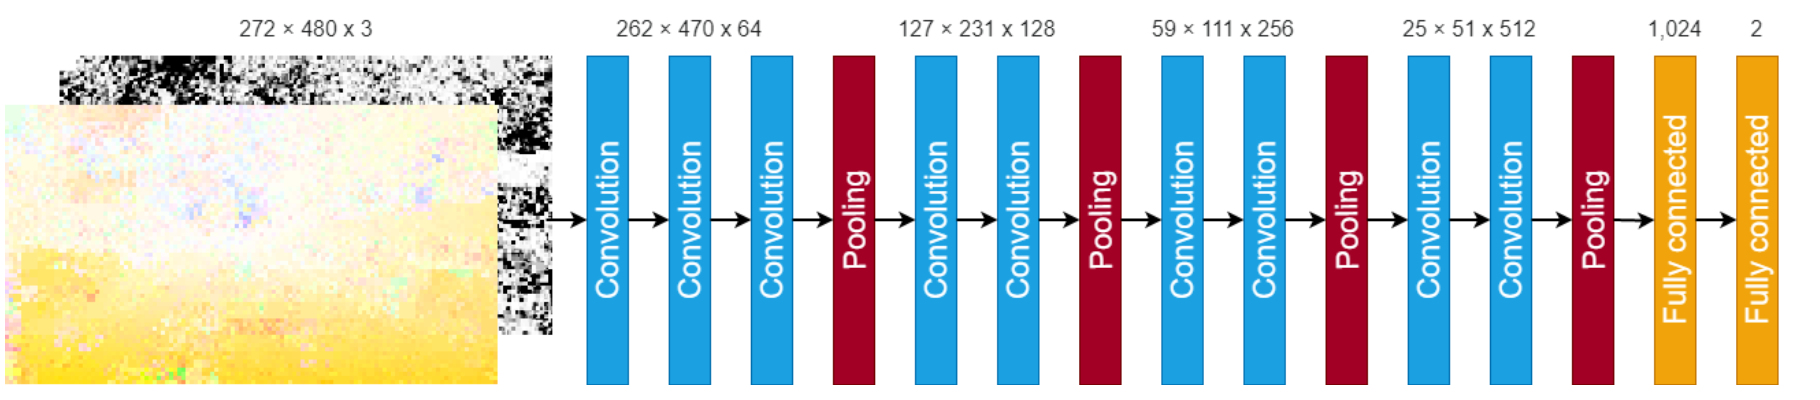 Schematic of trained convolutional neural network